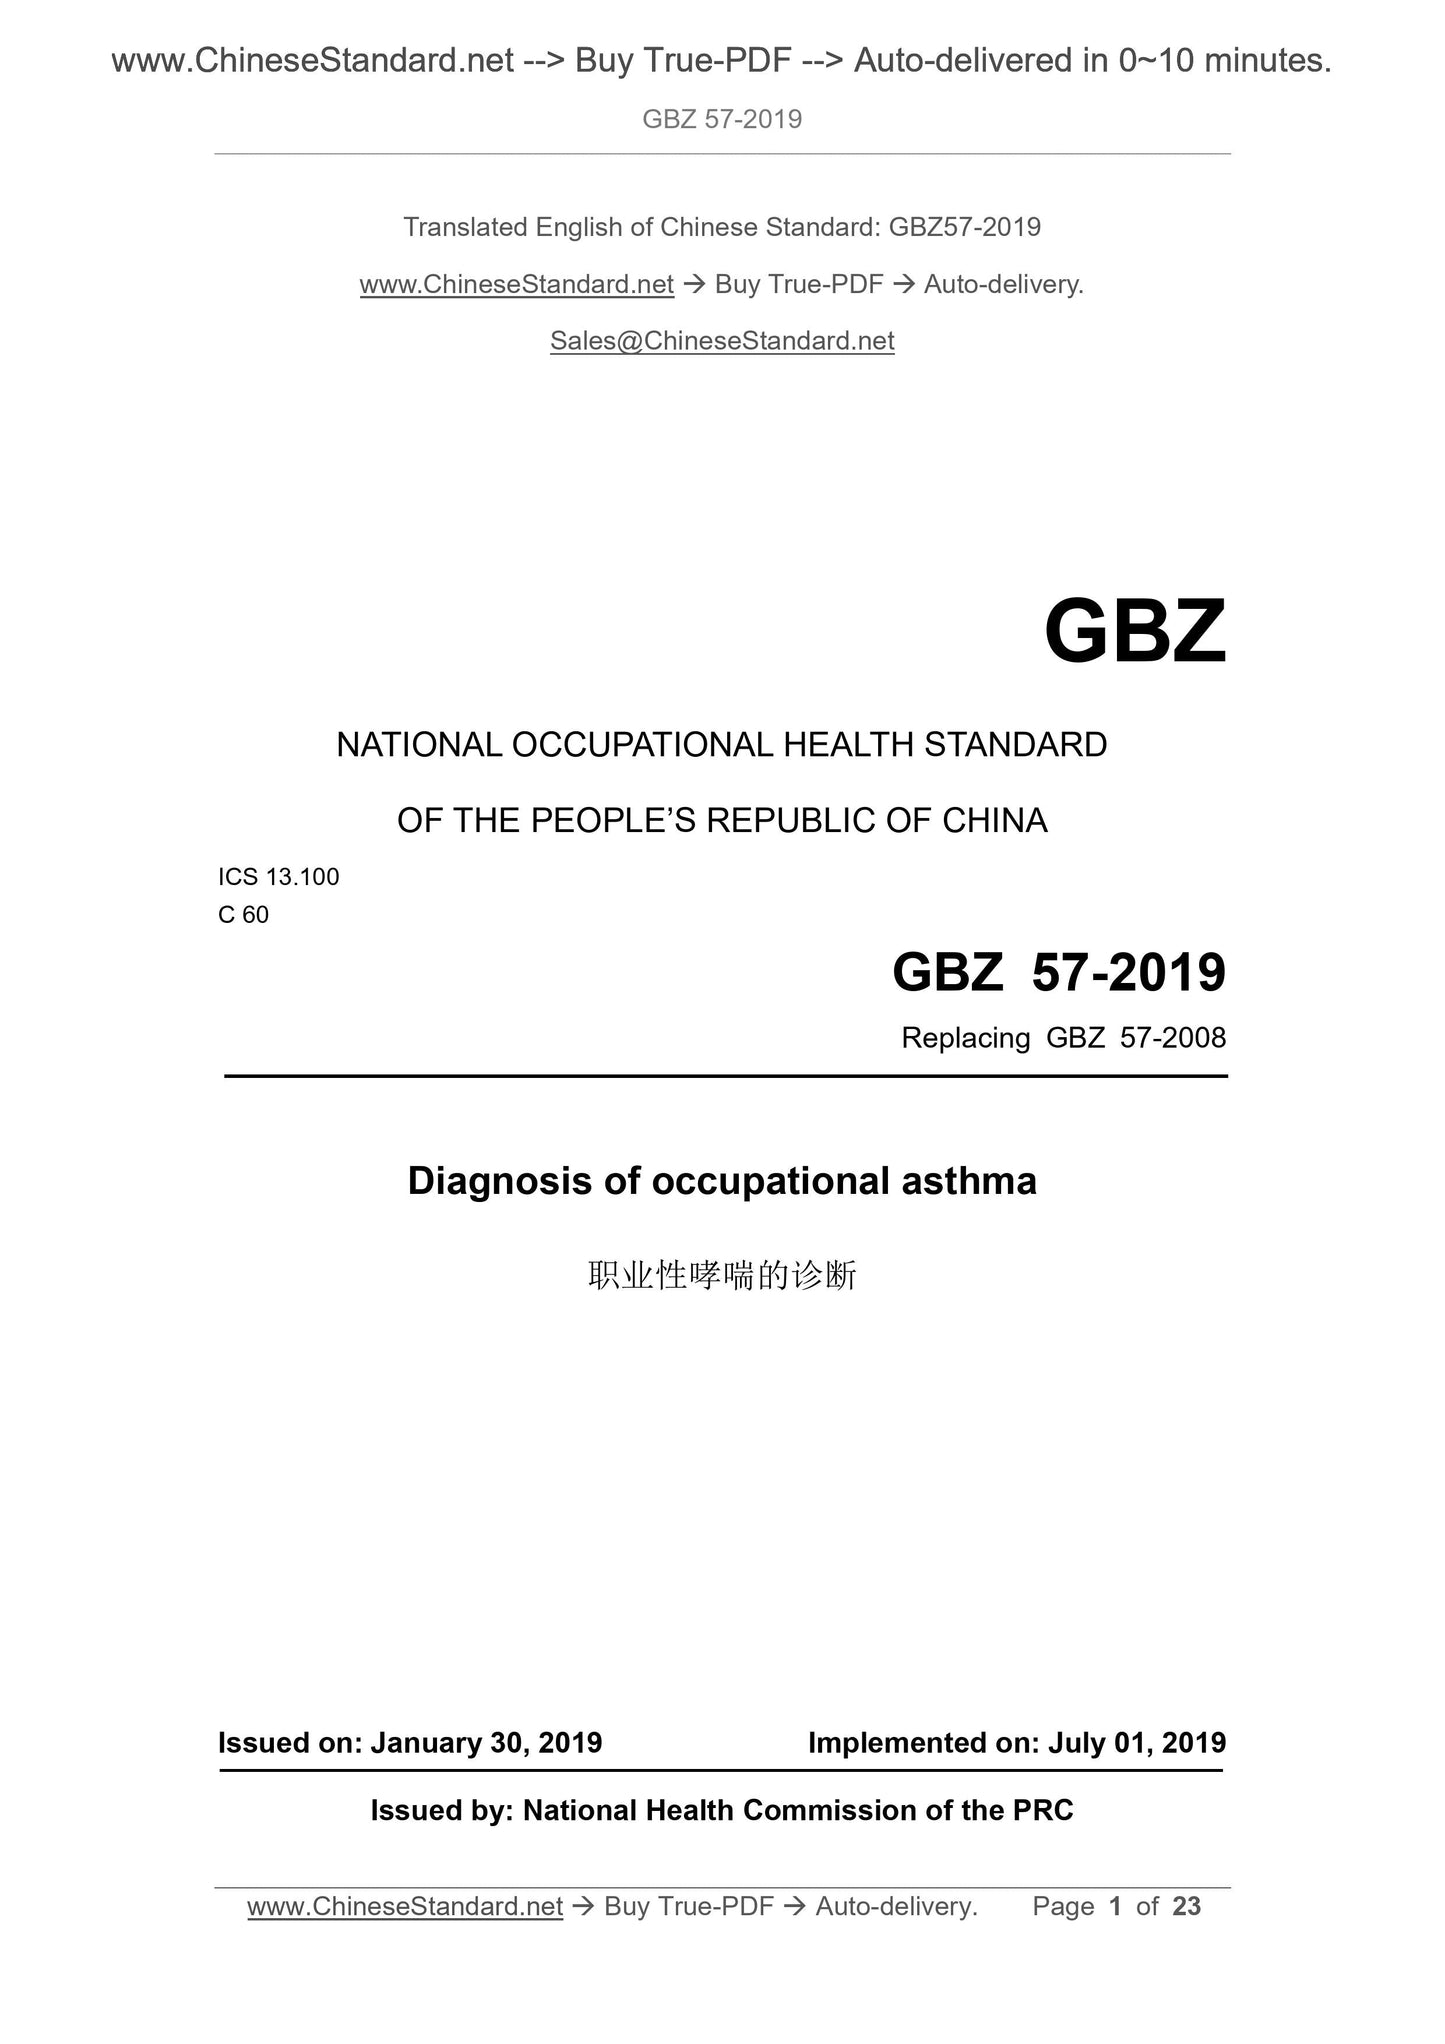 GBZ 57-2019 Page 1